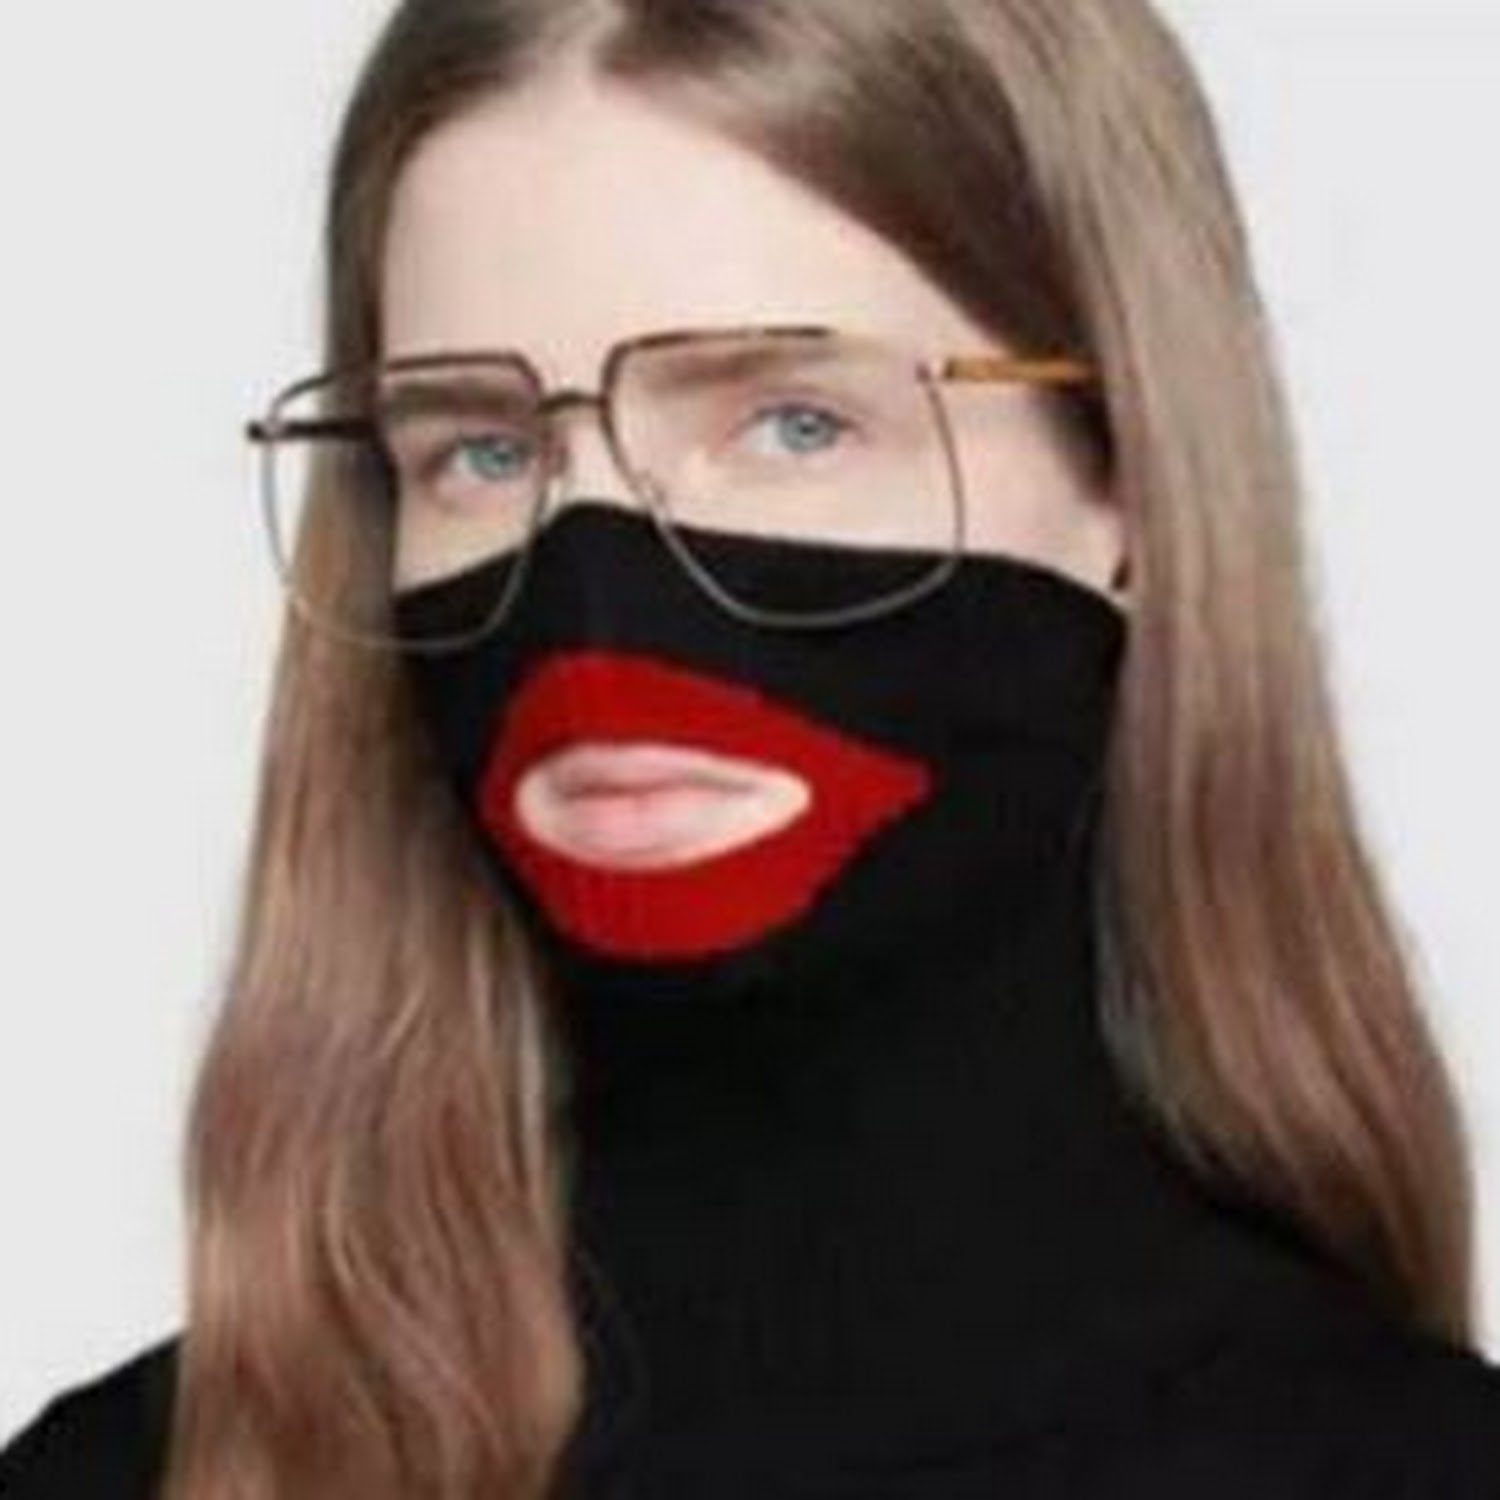 From Burberry noose shirts to Gucci blackface: When fashion brands got wrong